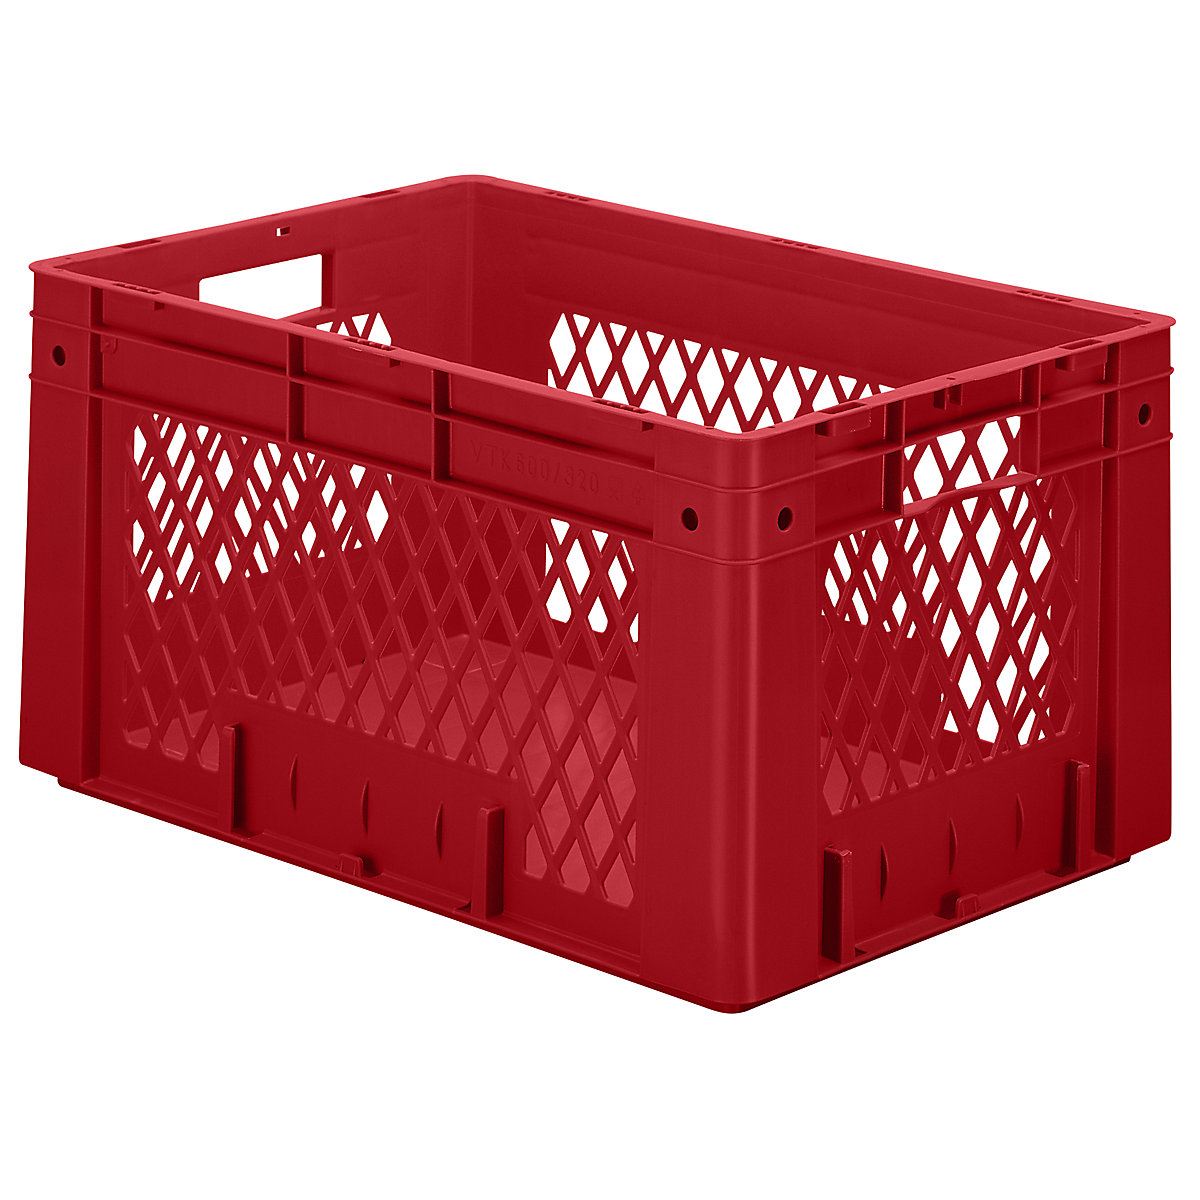 Heavy duty Euro container, polypropylene, capacity 60 l, LxWxH 600 x 400 x 320 mm, perforated walls, solid base, red, pack of 2